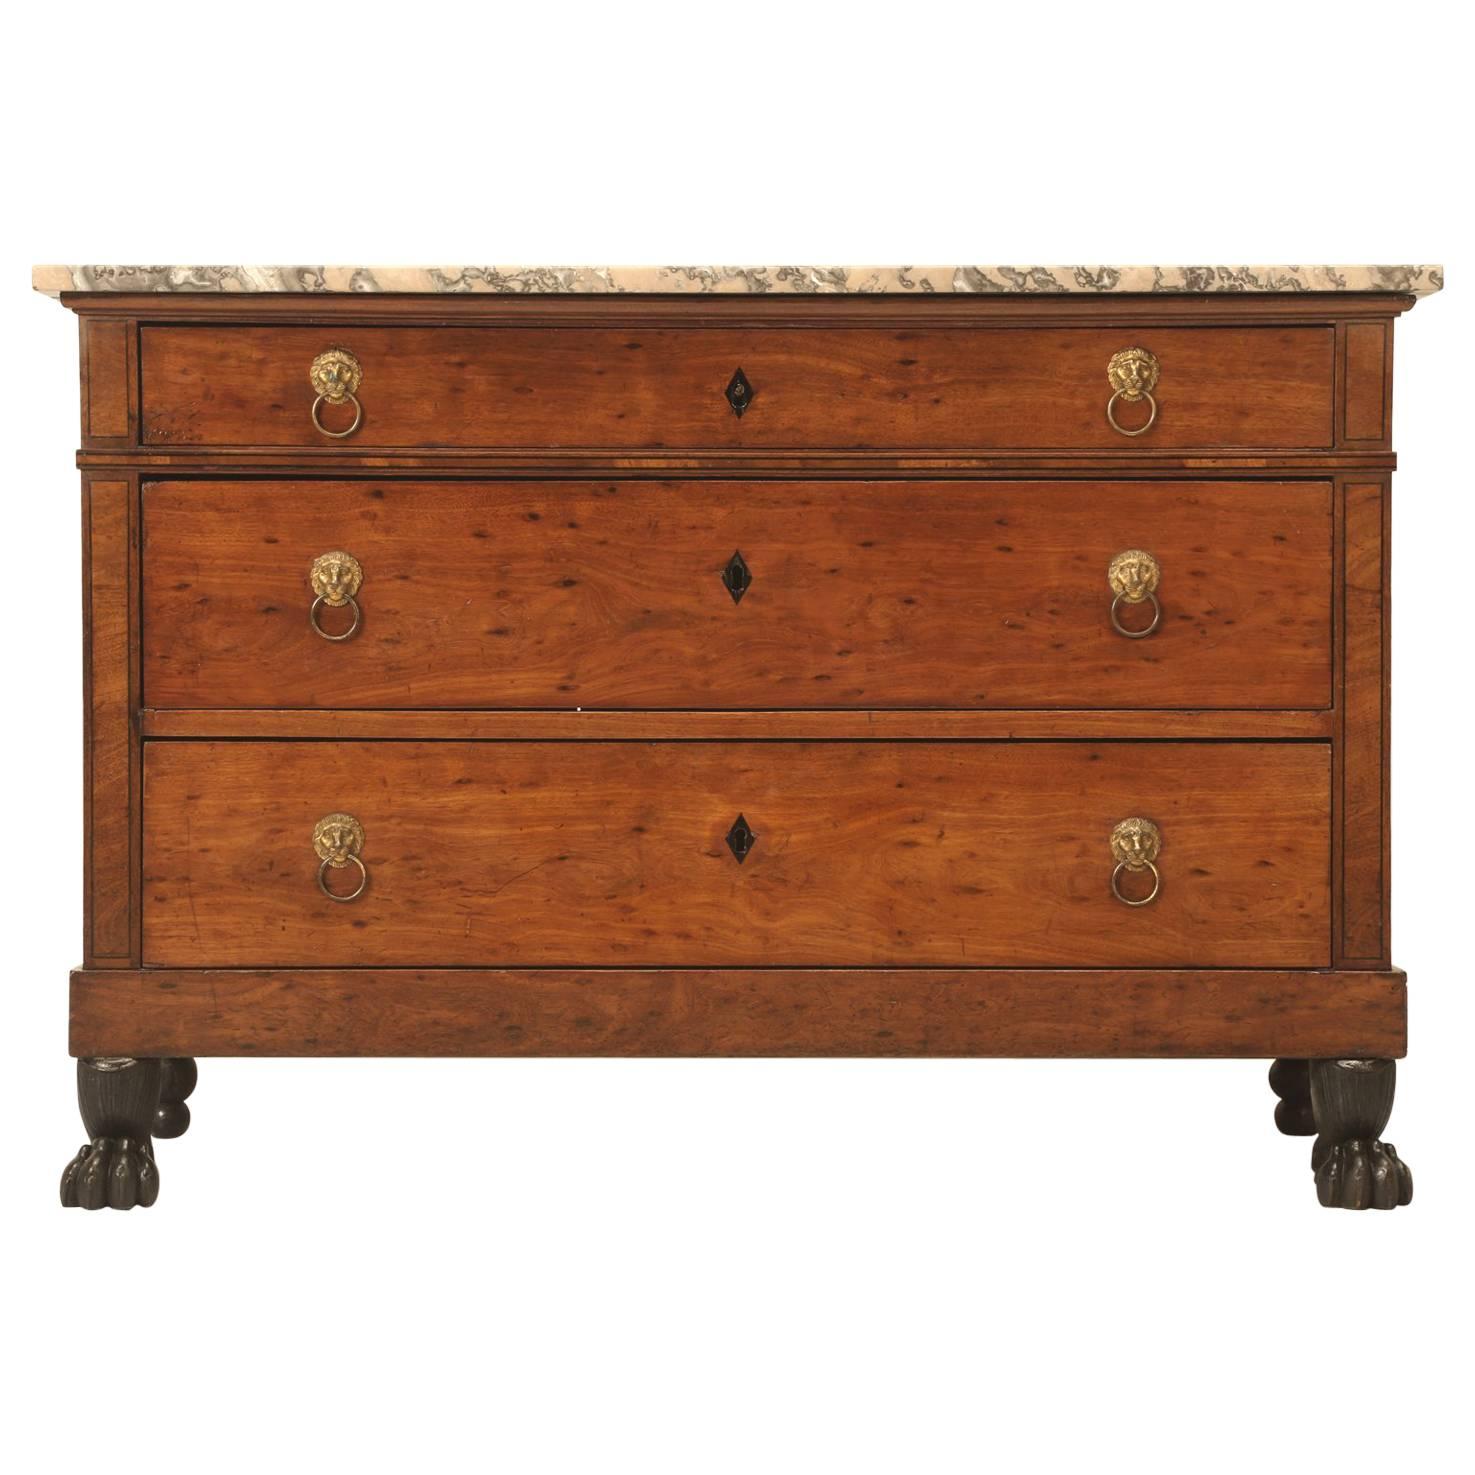 Antique French Commode from the Restauration, circa 1815-1830